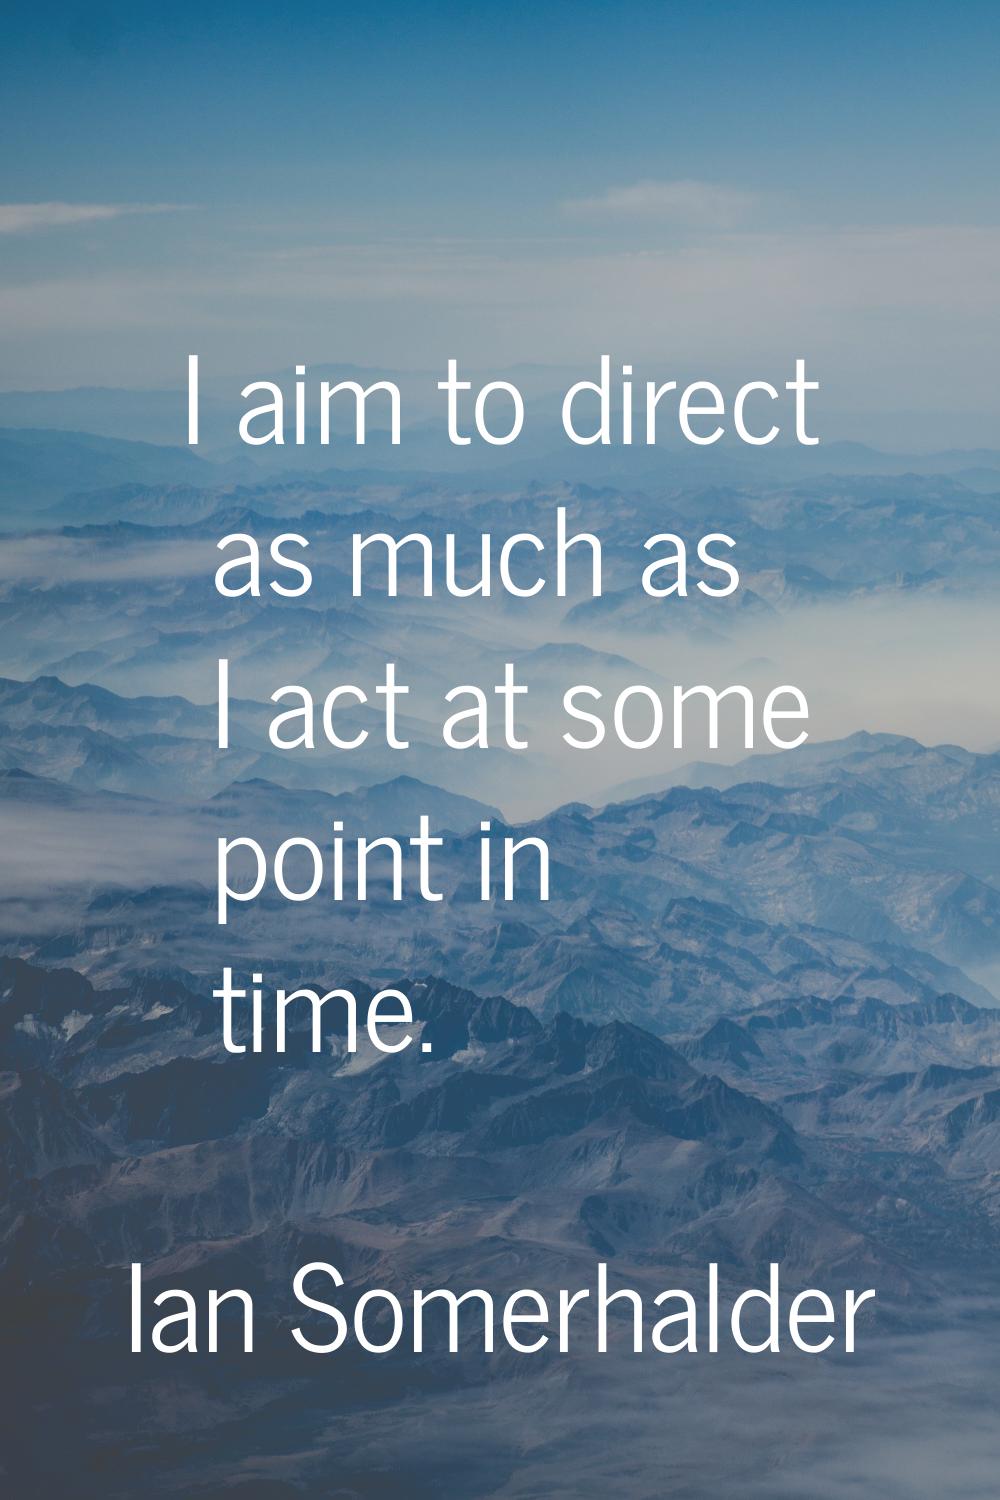 I aim to direct as much as I act at some point in time.